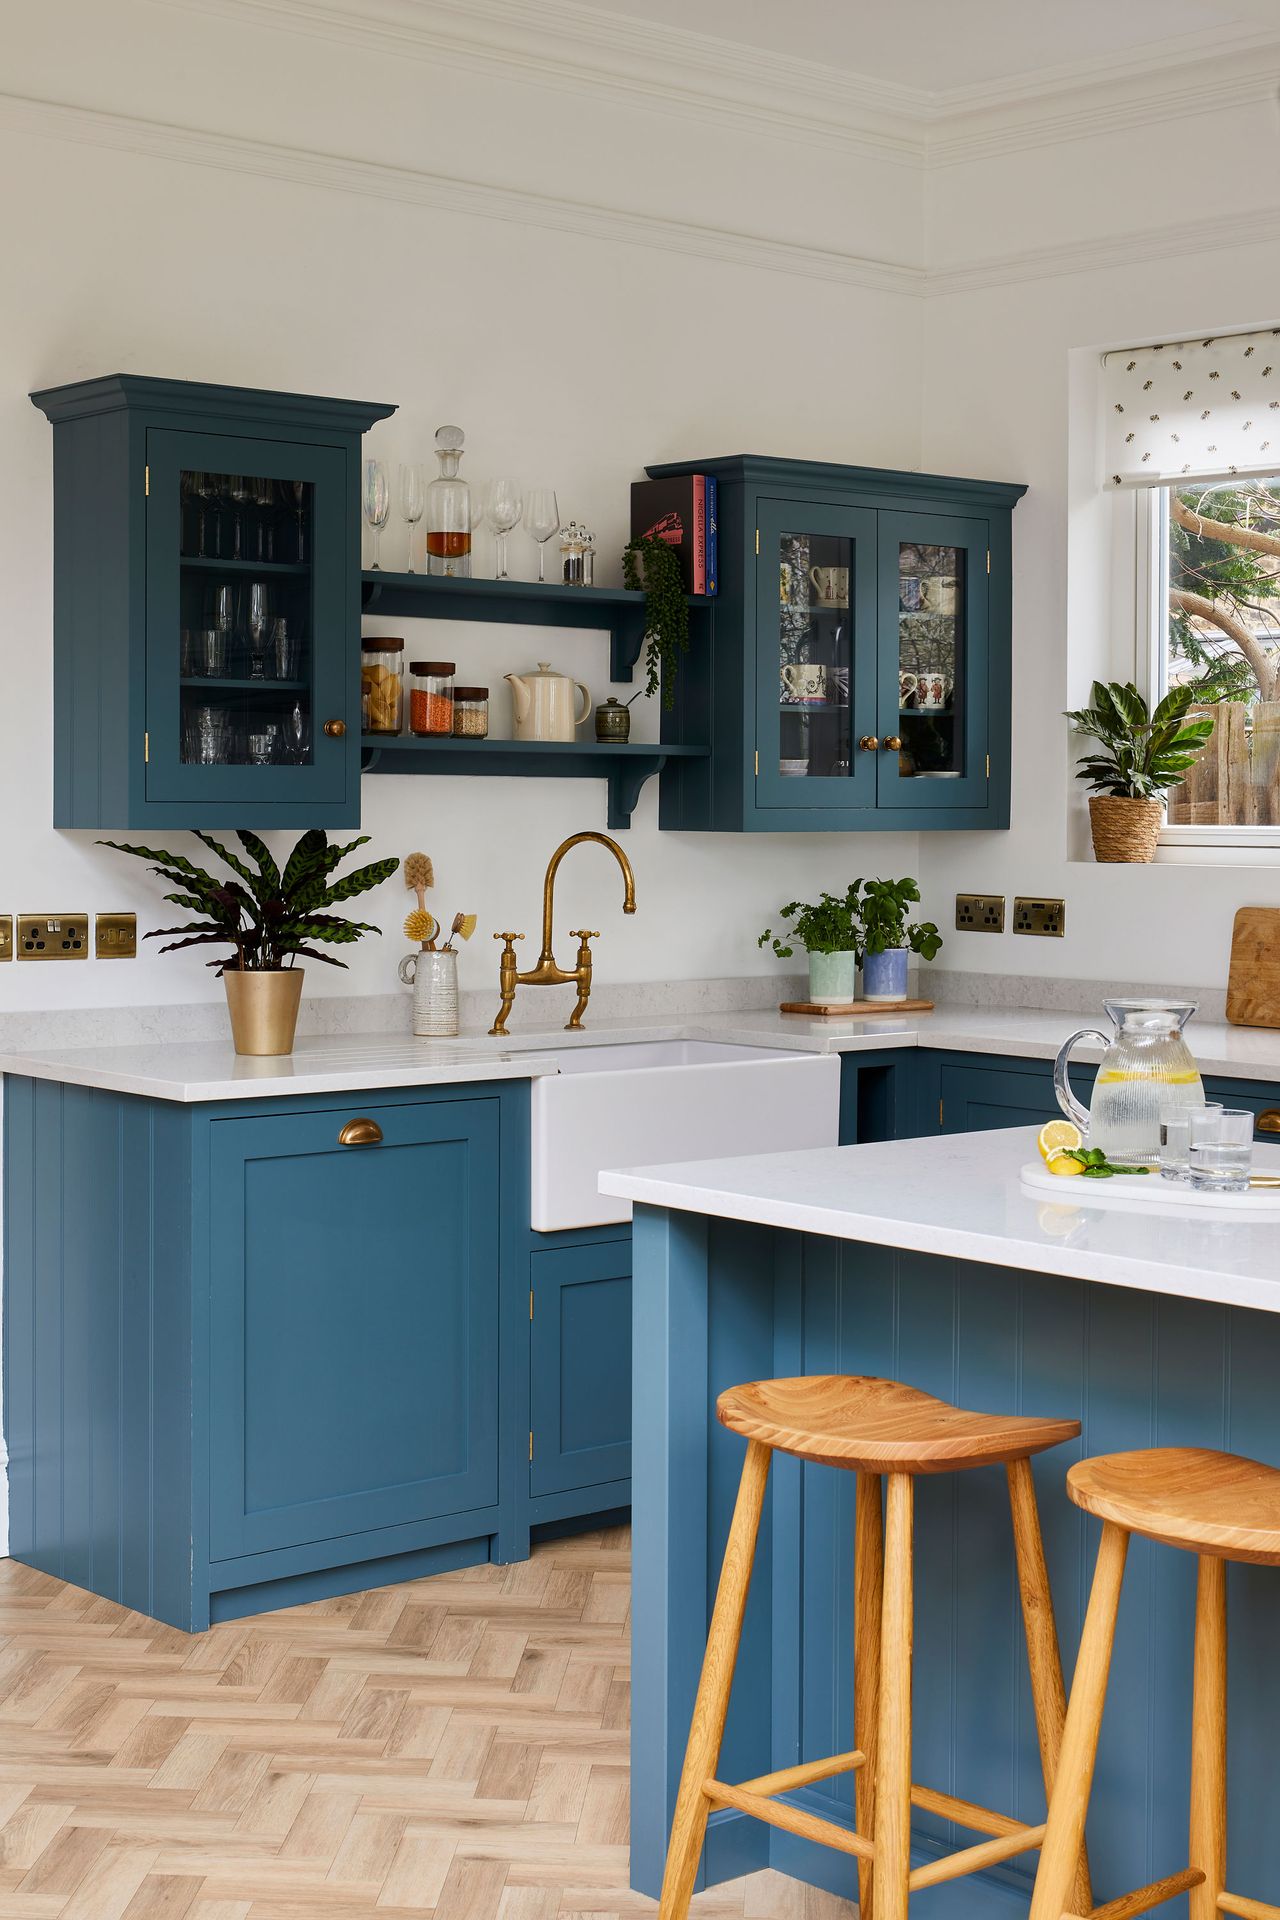 Blue kitchens – 27 navy, cobalt, periwinkle and teal ideas | Real Homes